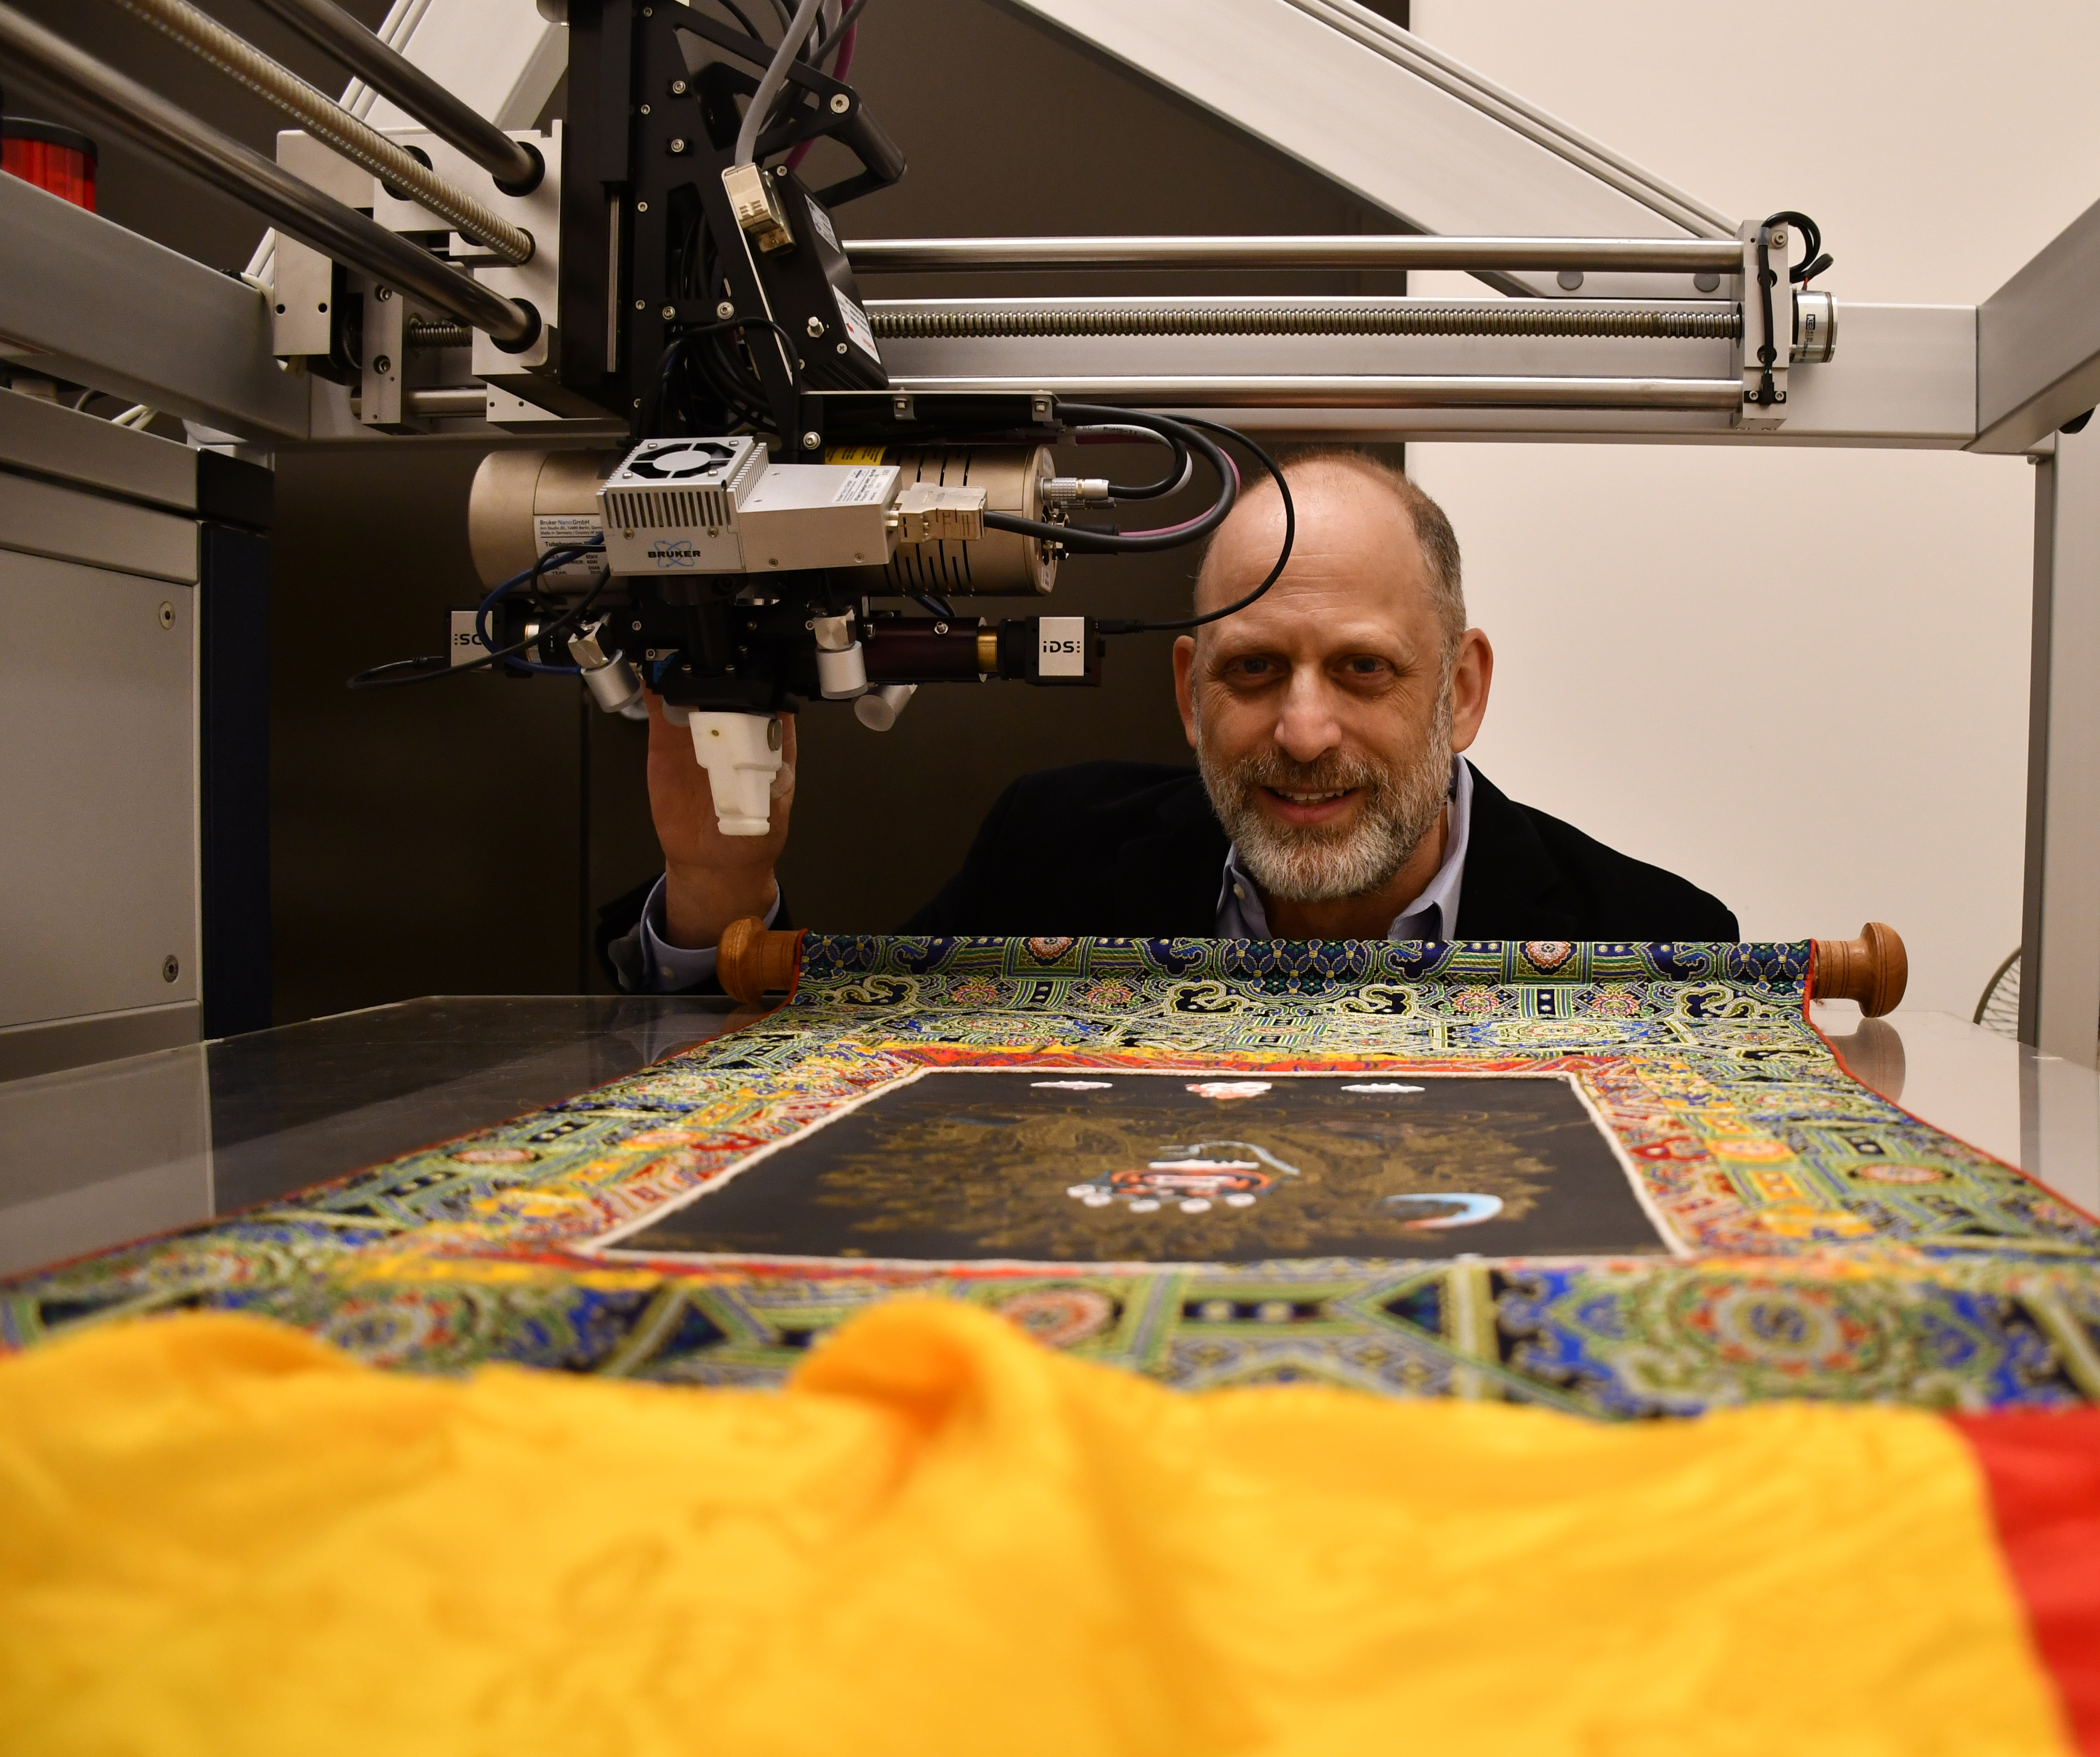 Aaaron Shugar working with a tapestry